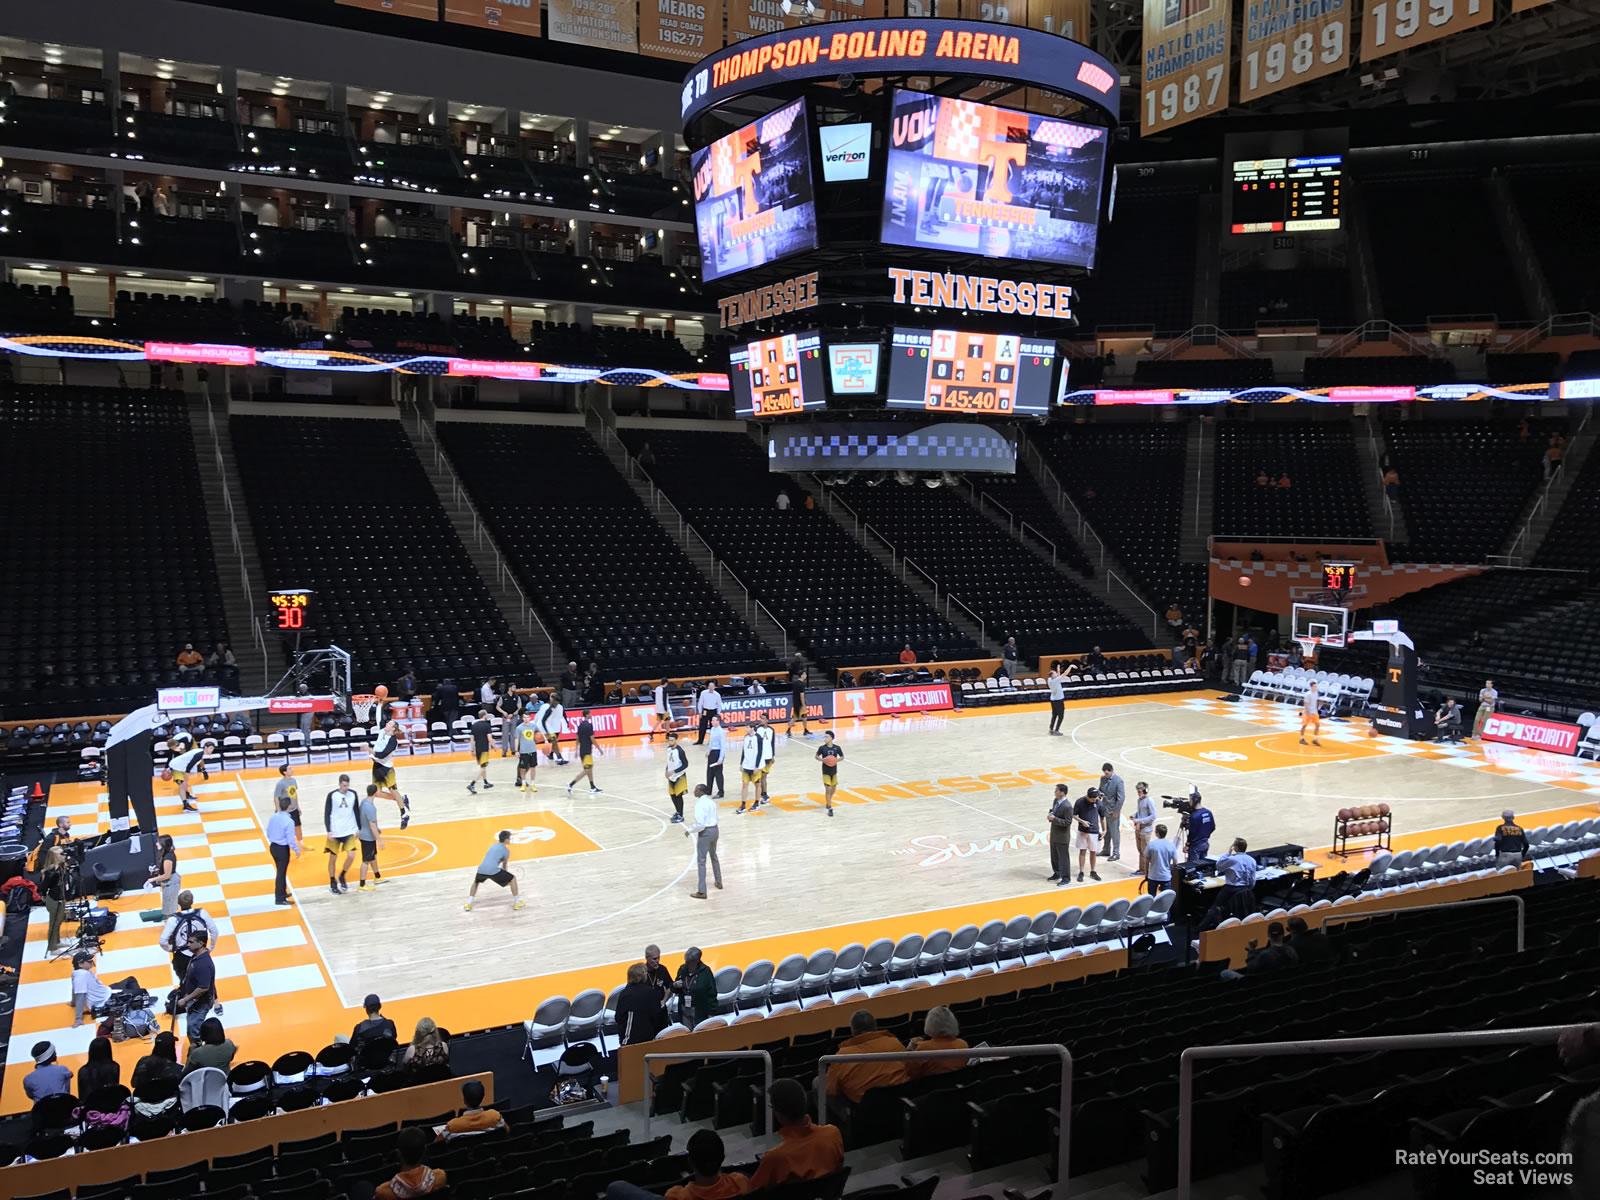 section 123, row 17 seat view  - thompson-boling arena